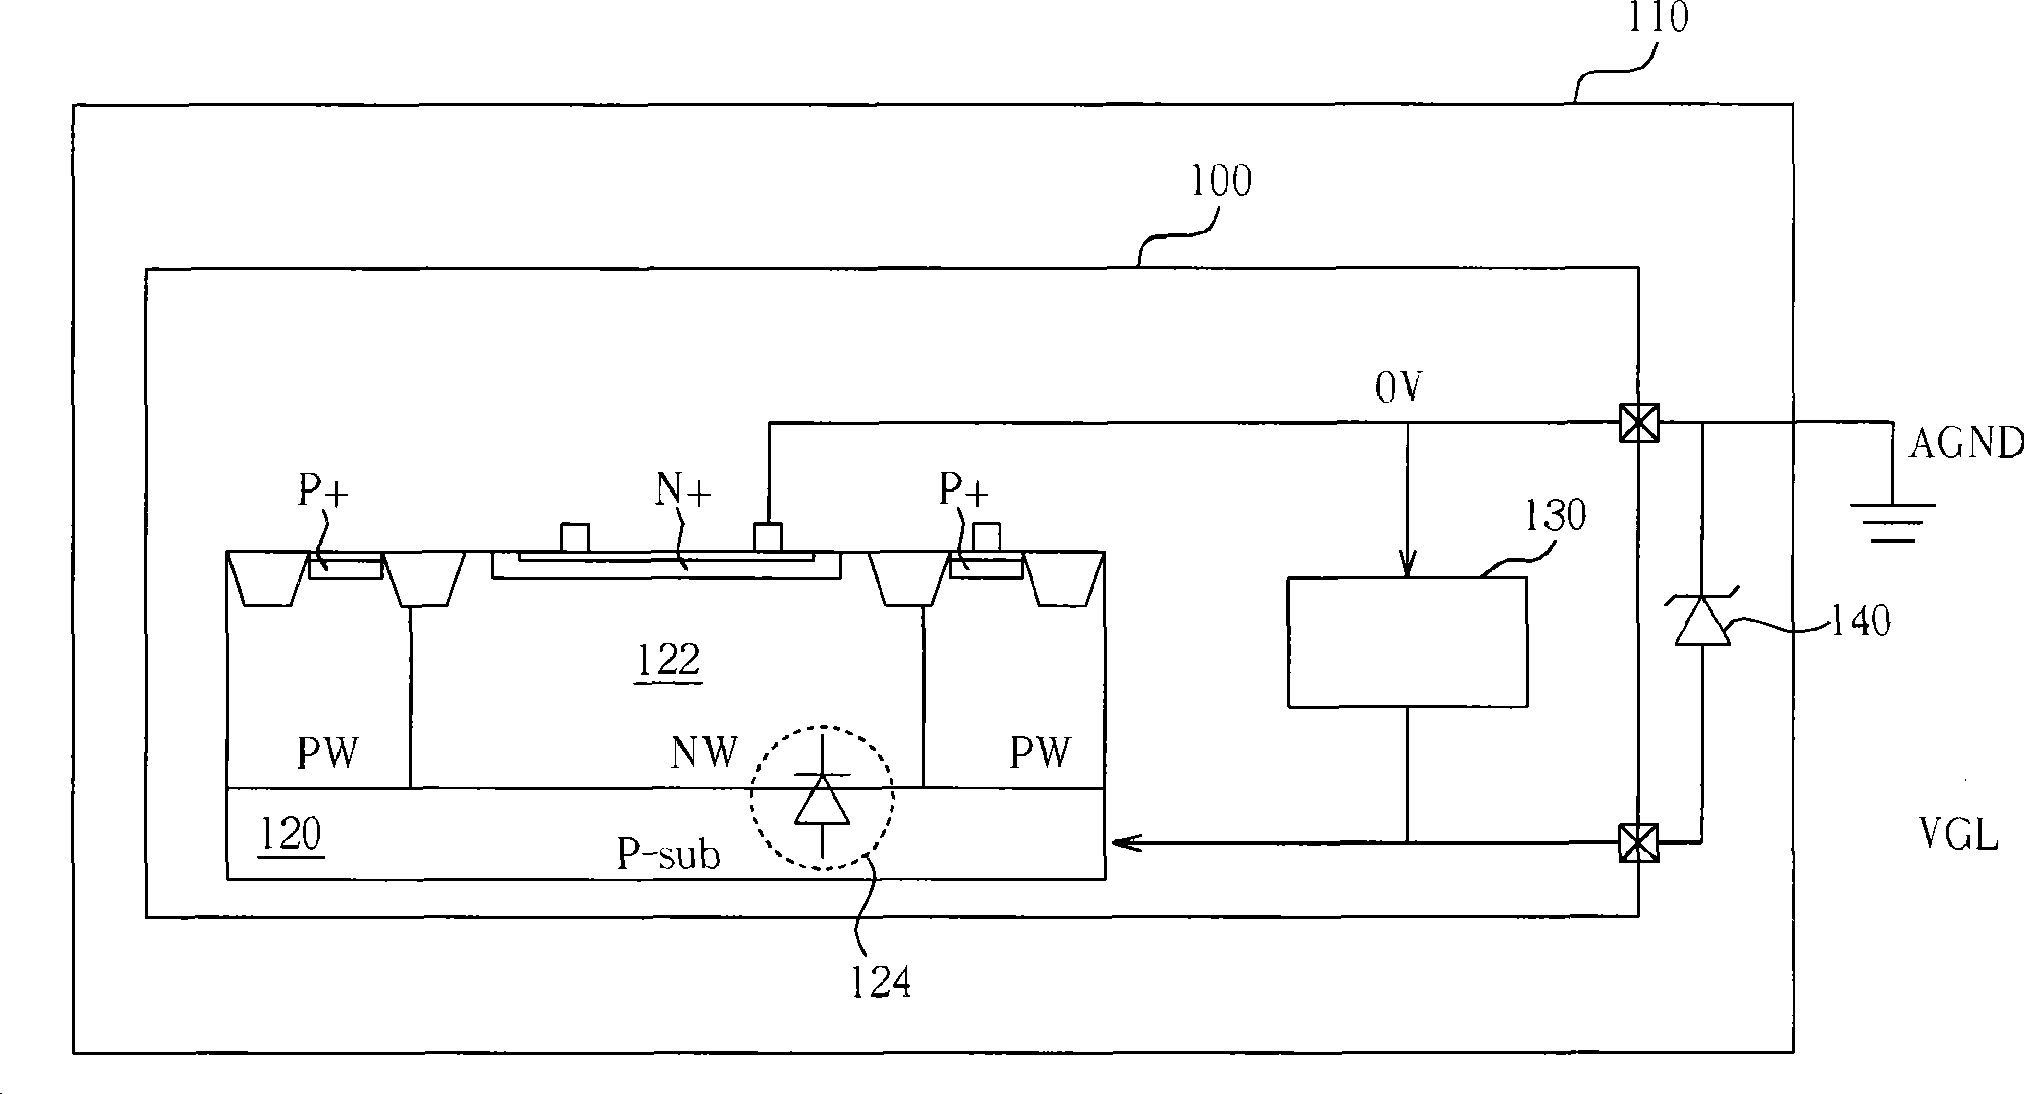 Voltage level clamping circuit and comparator module